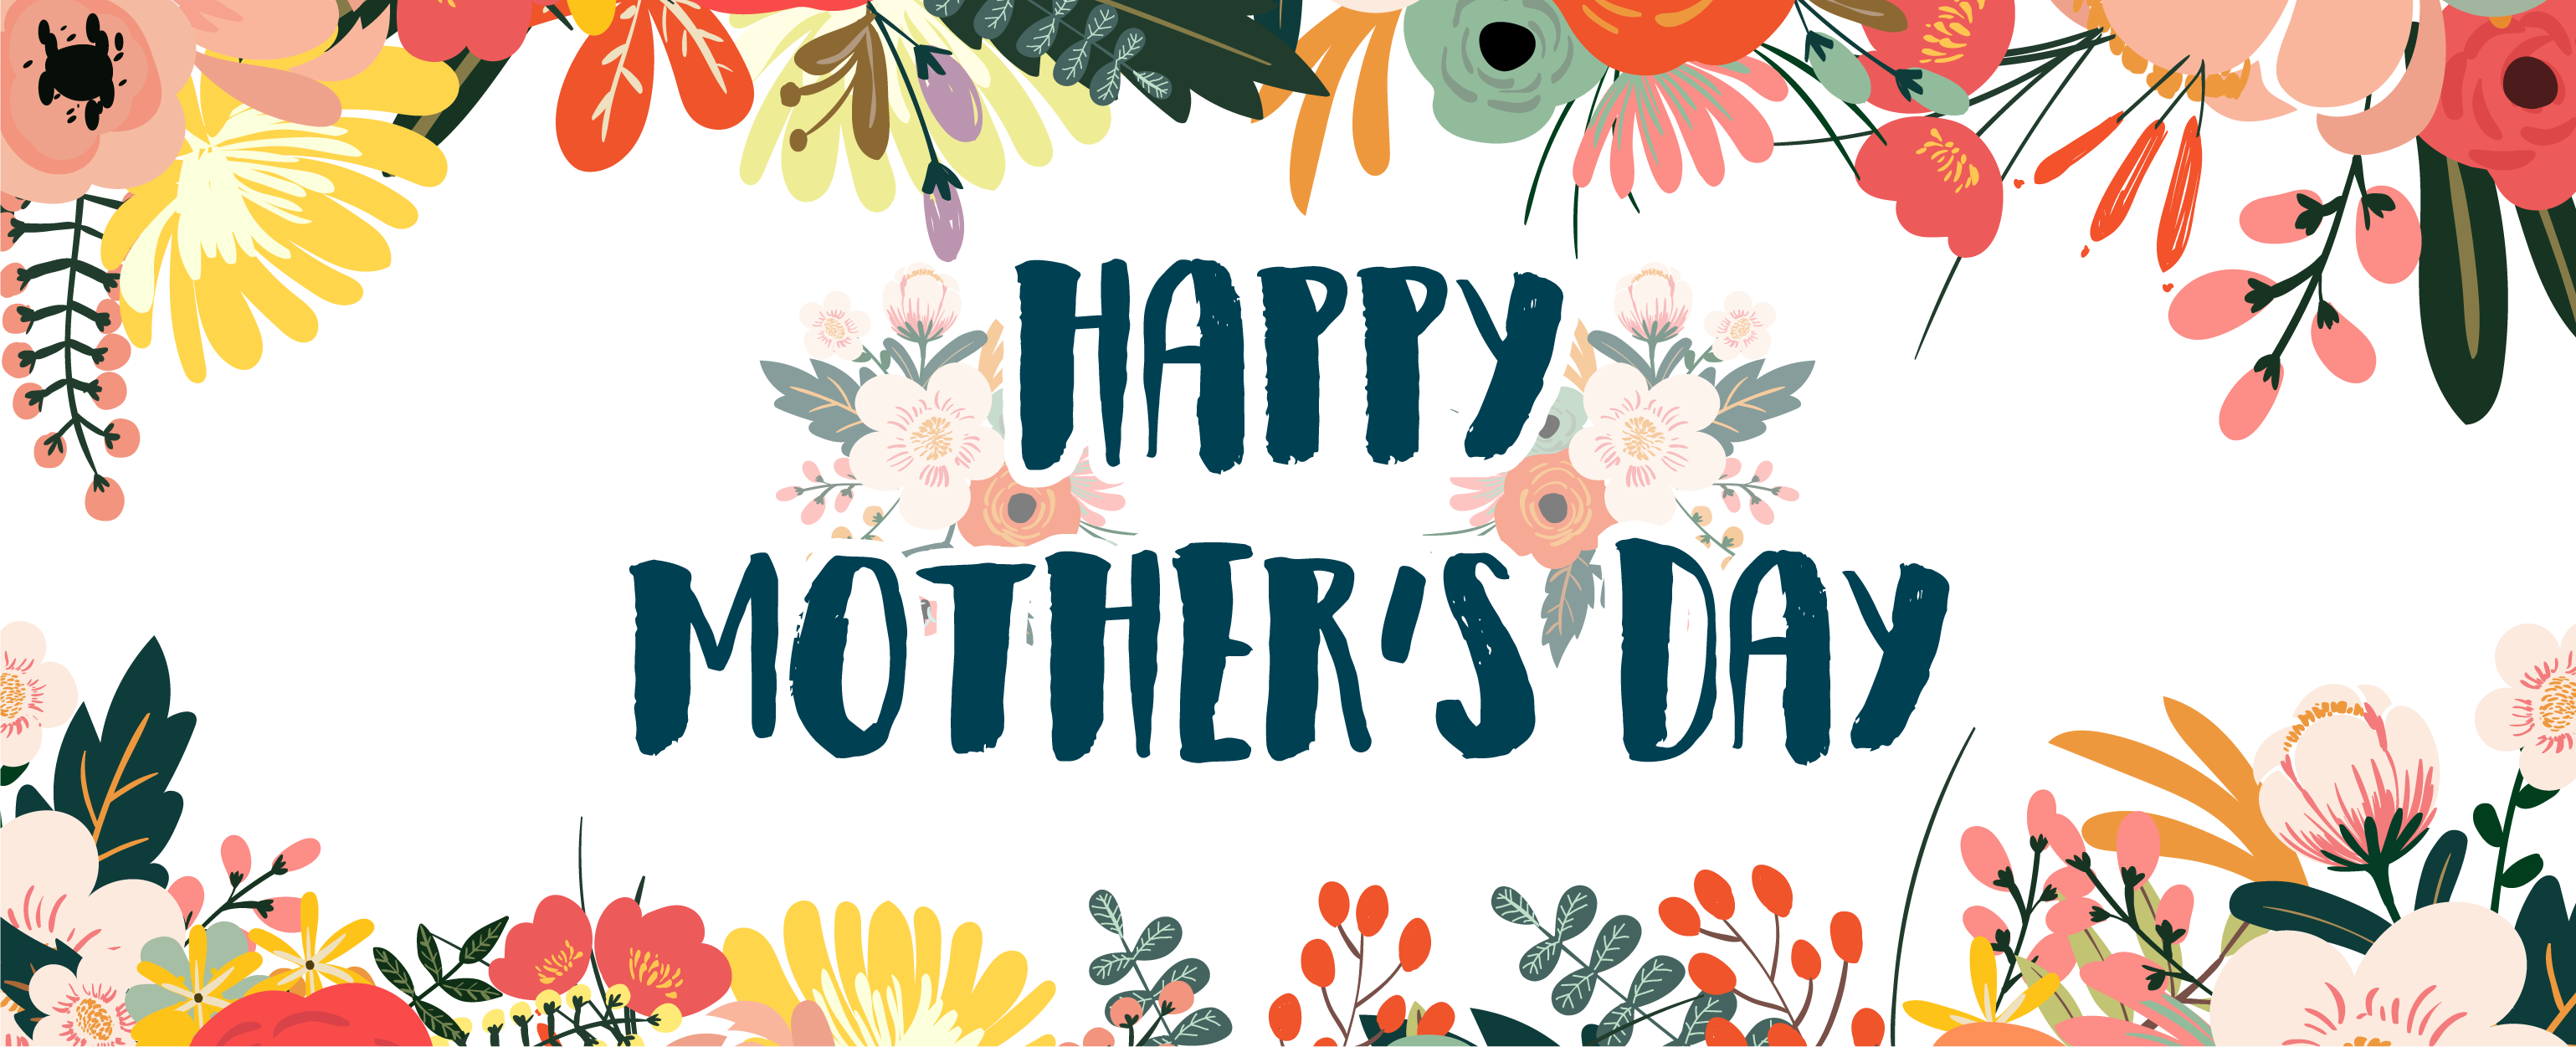 Free Mothers Day Png, Download Free Mothers Day Png png images, Free